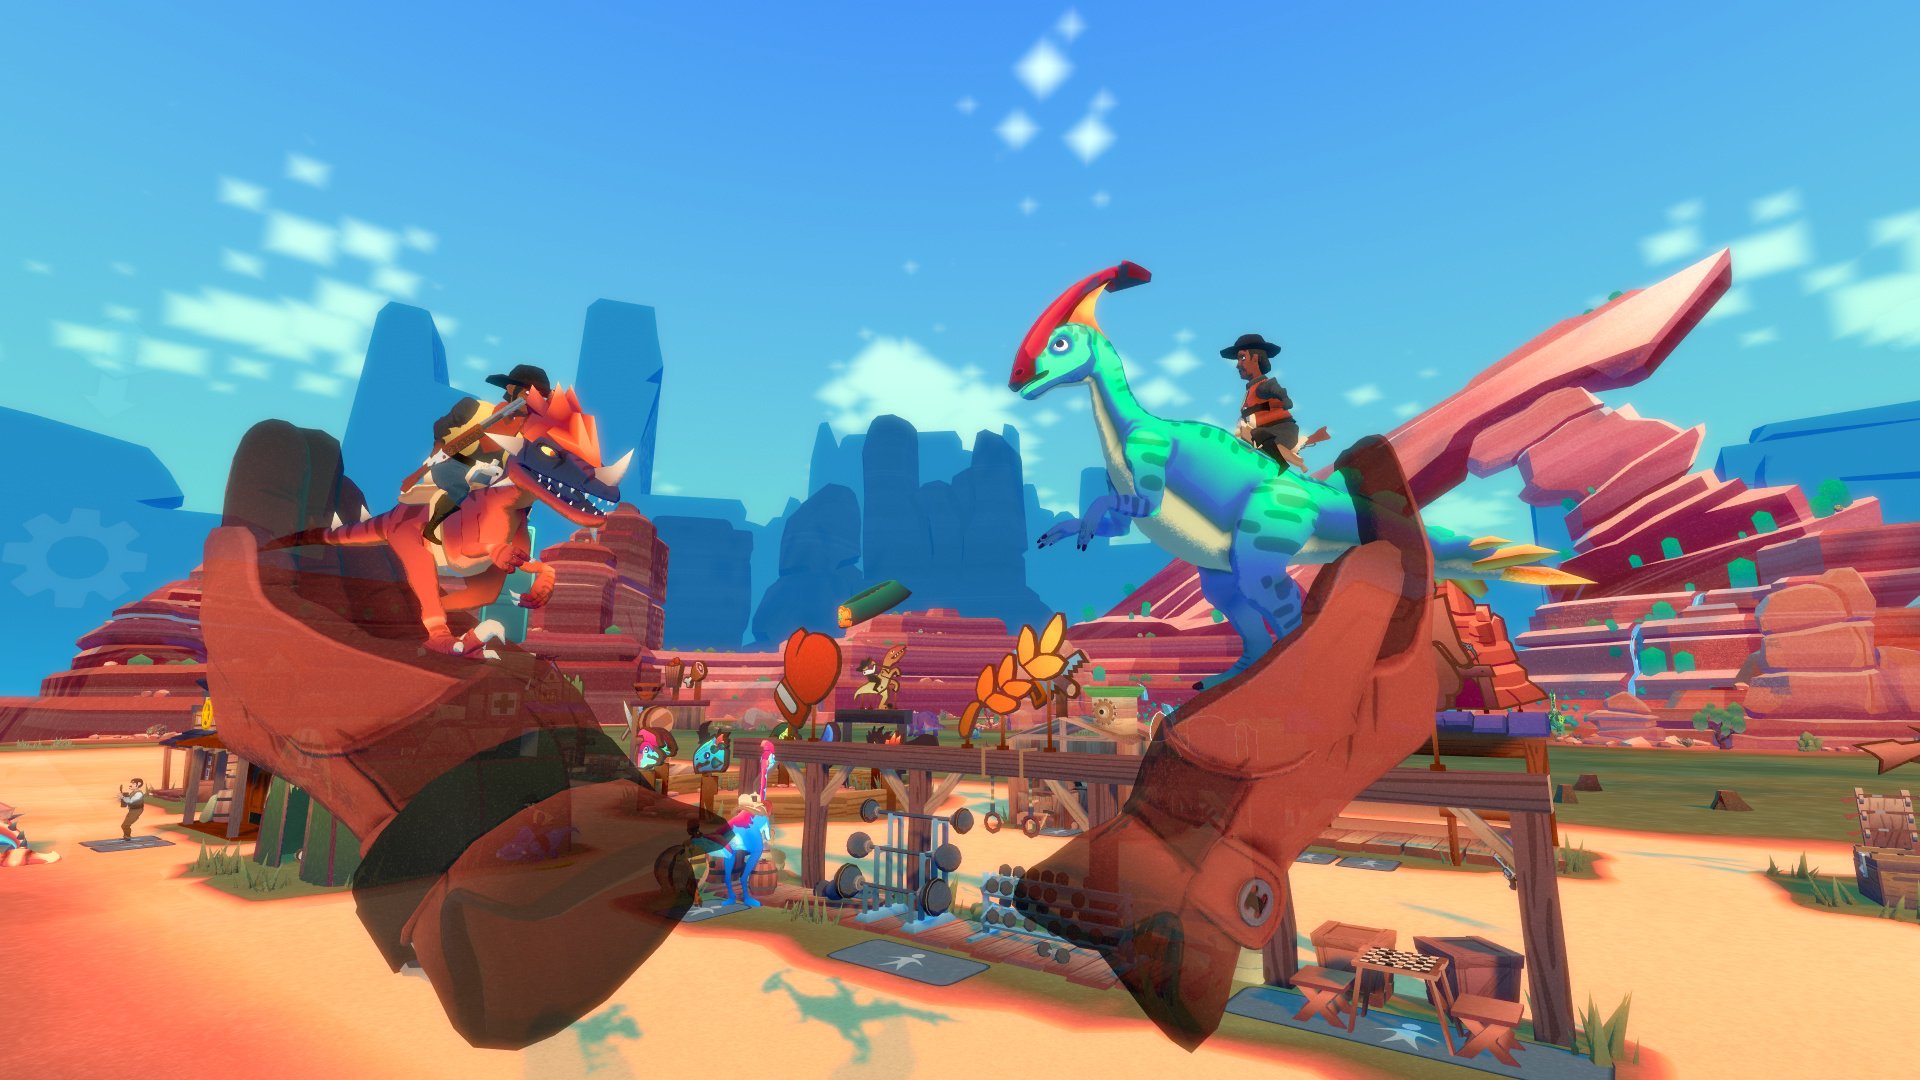 Dino Frontier (PS4 / PlayStation 4) Game Profile | News, Reviews, Videos & Screenshots